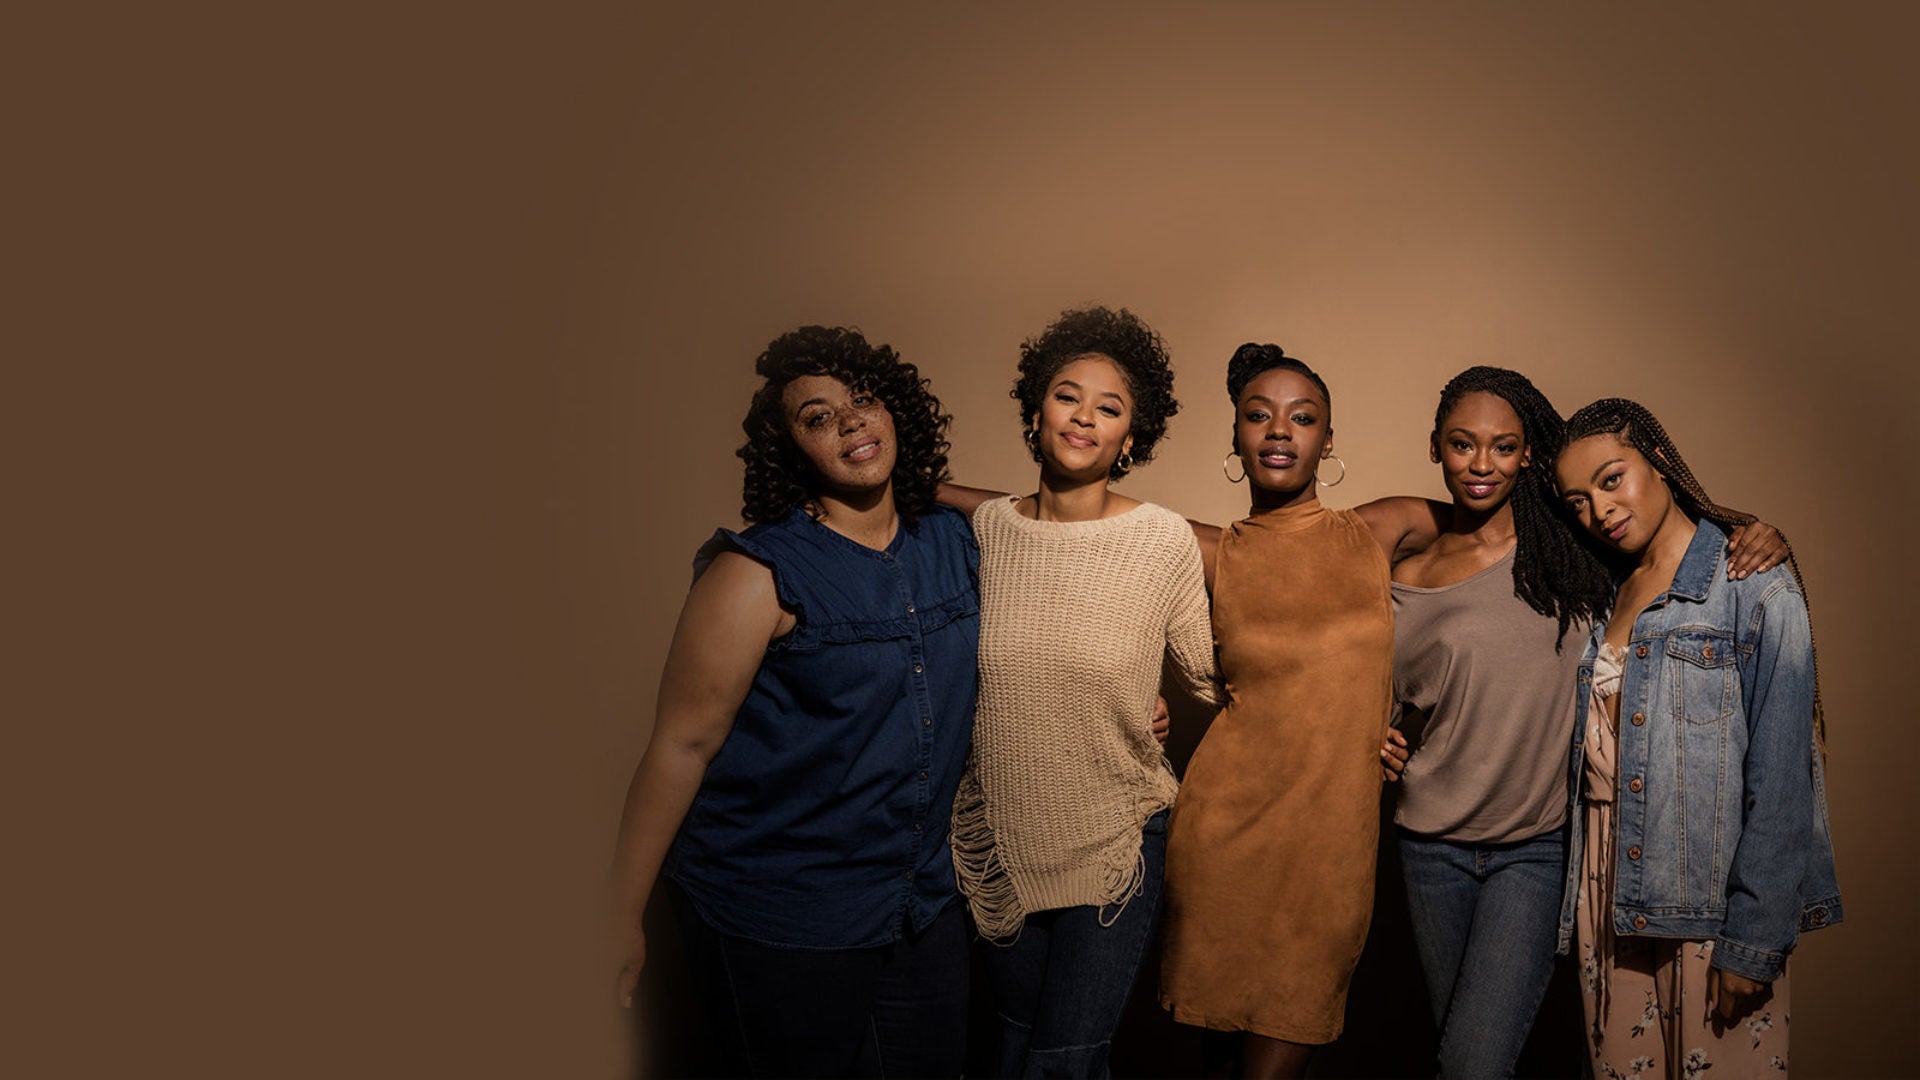 The Know Your Girls Campaign Wants Black Women To Advocate For Their Breast Health